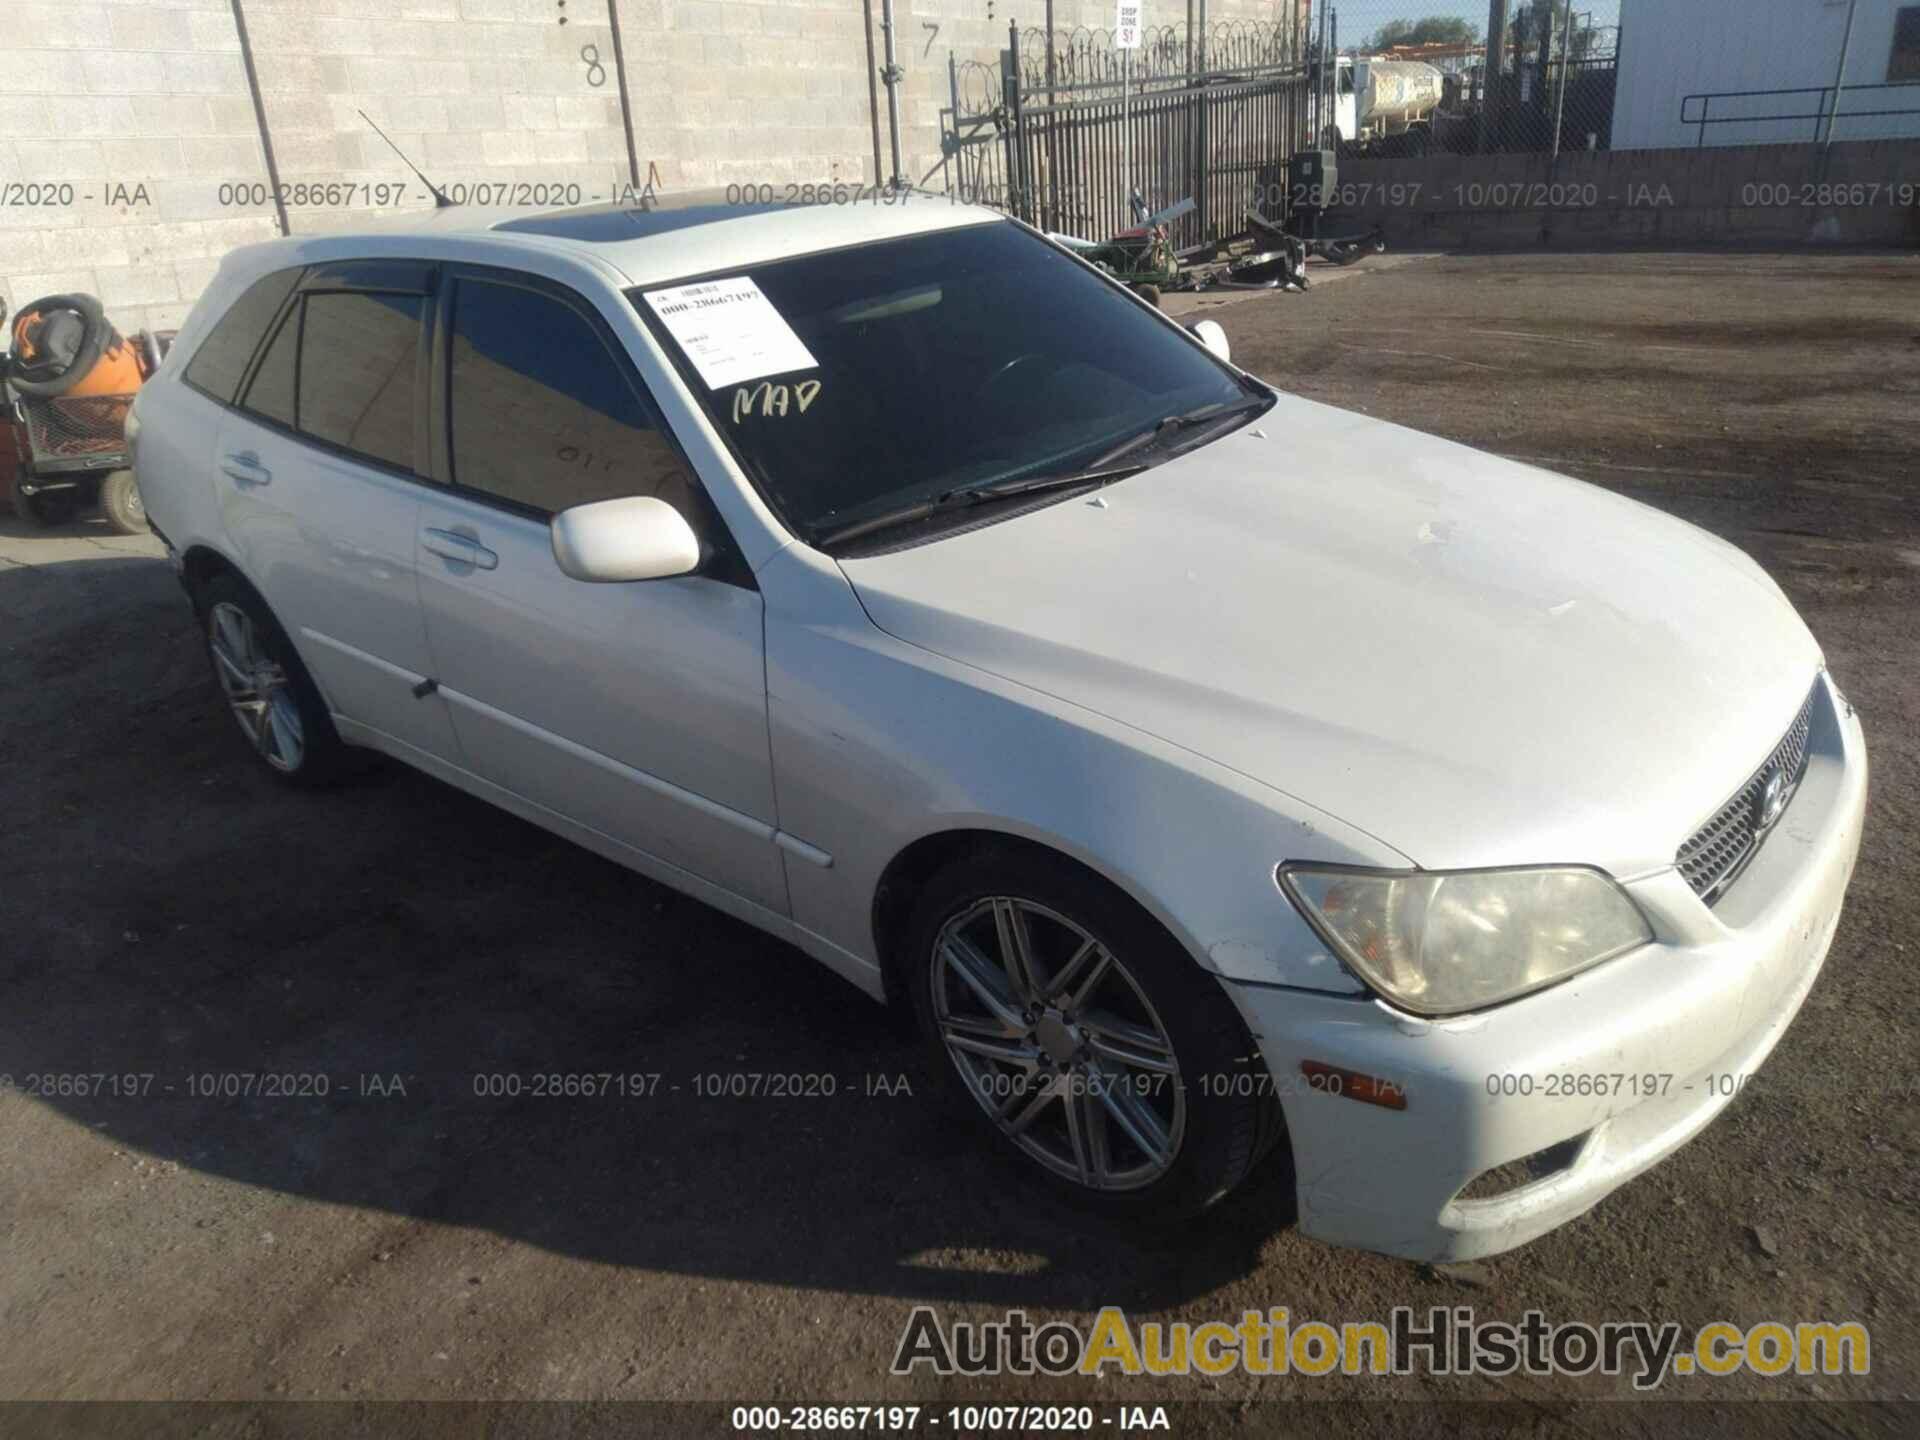 LEXUS IS 300, JTHED192820040641